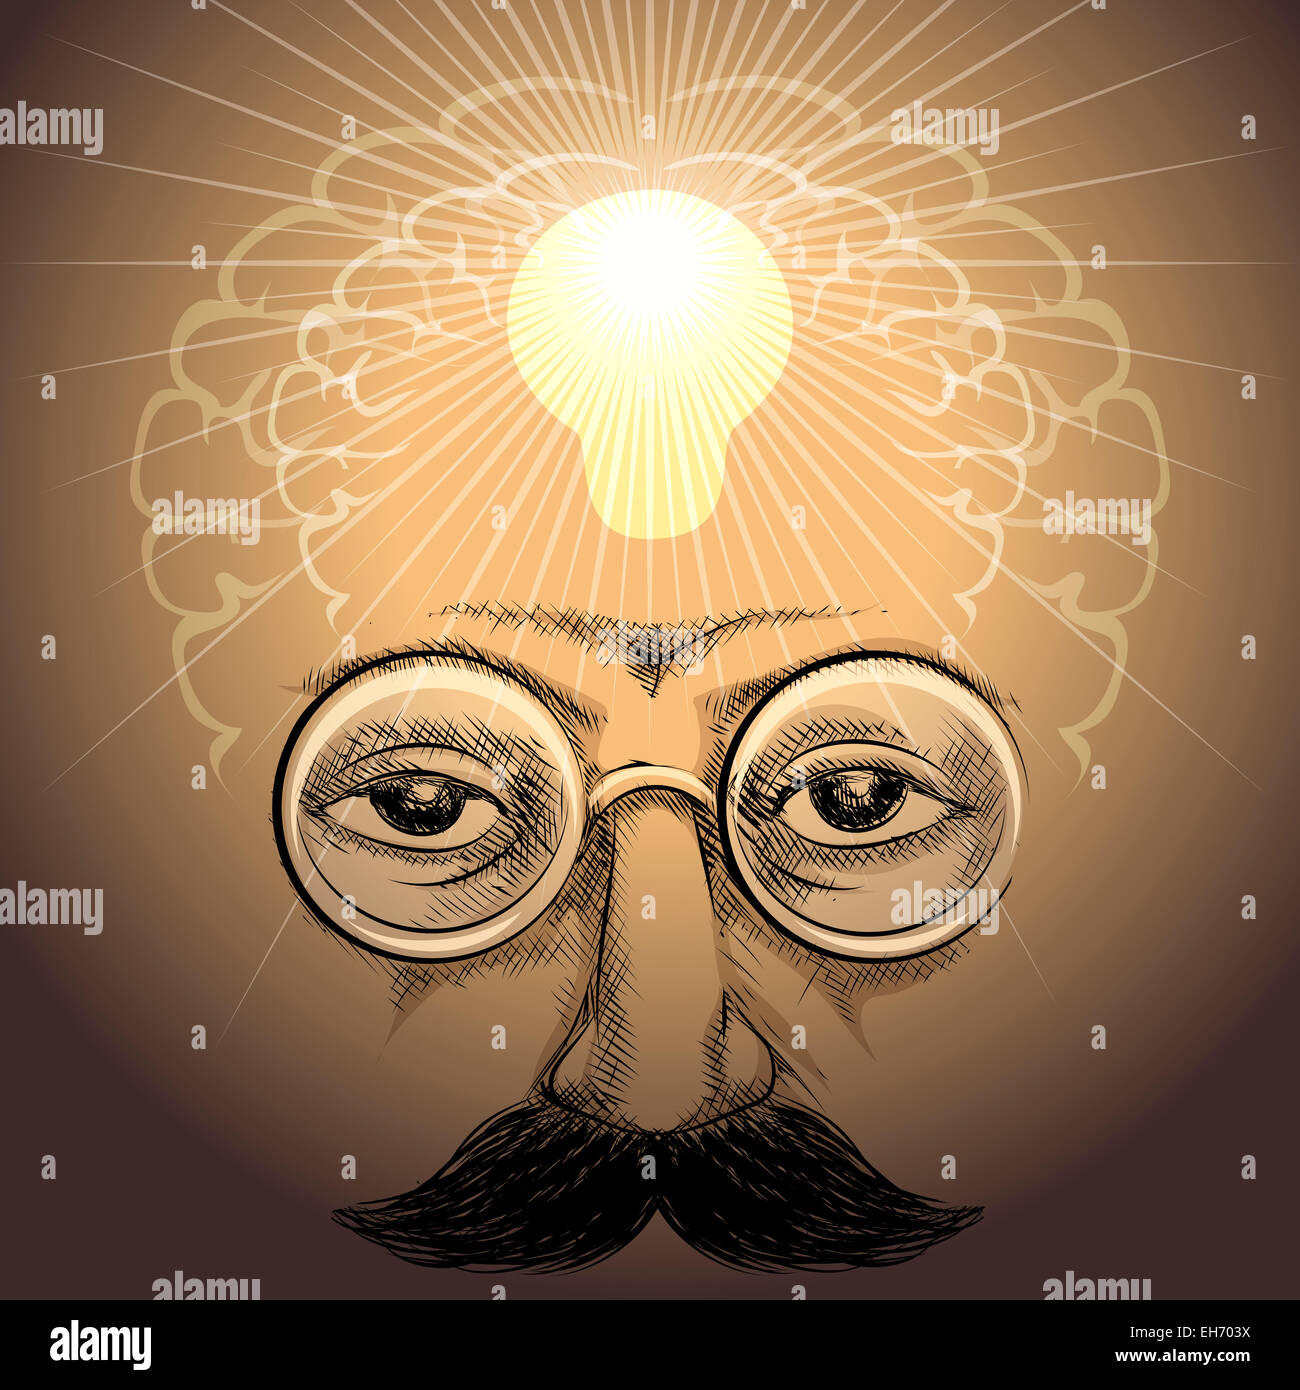 Illustration with face of scientist and lamp light up his brains inside as metaphor of discovery drawn in retro style Stock Photo